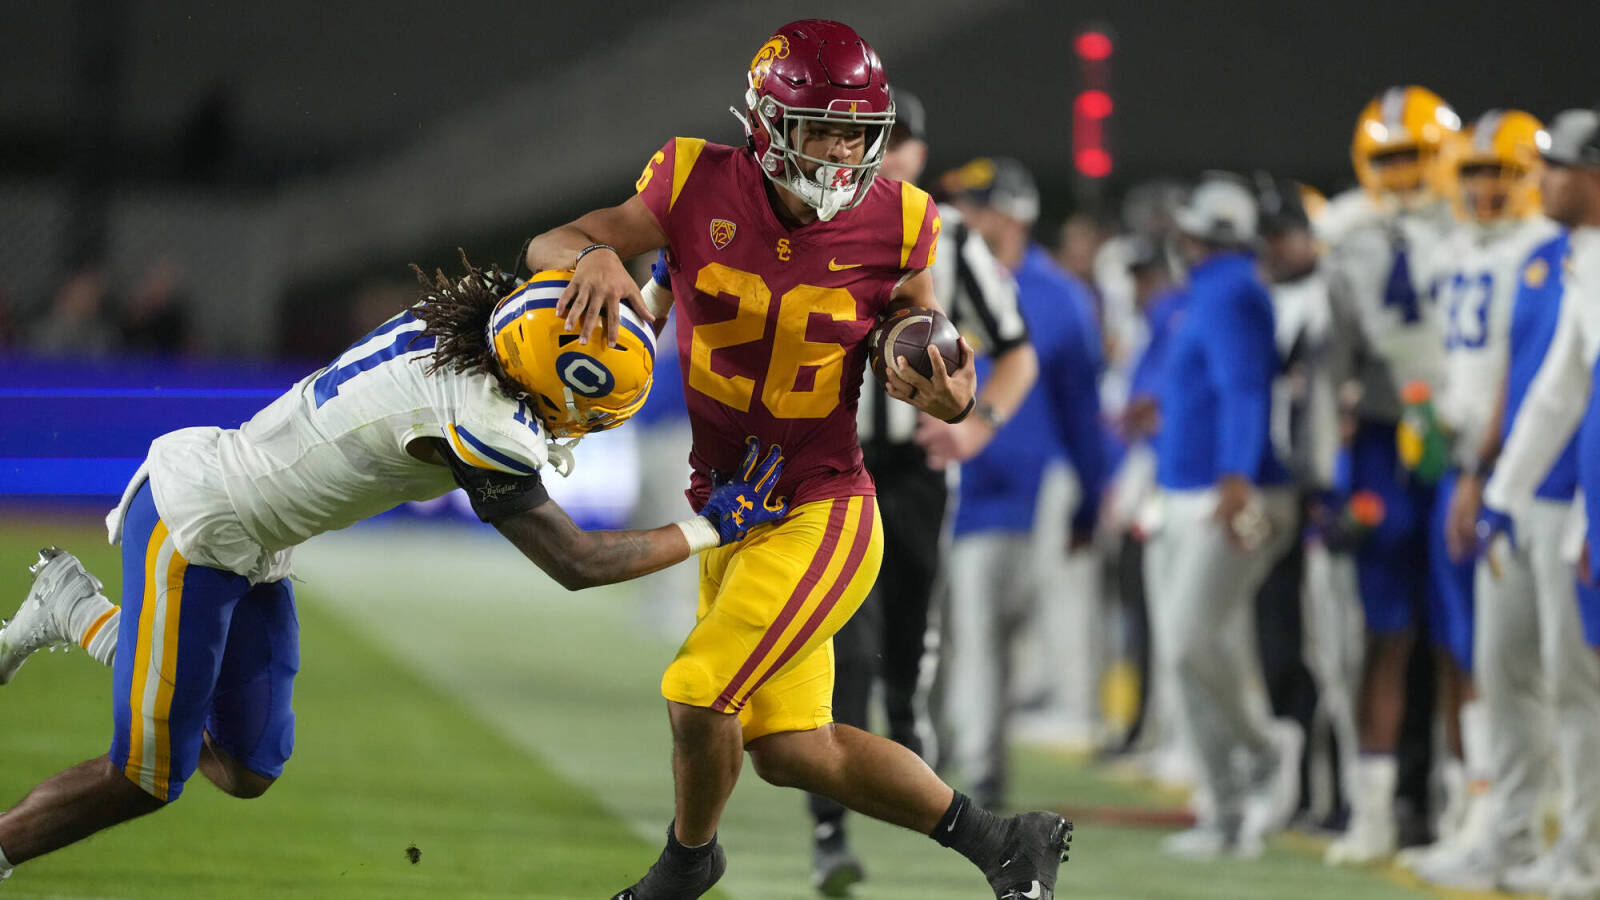 USC RB Travis Dye carted off with knee injury